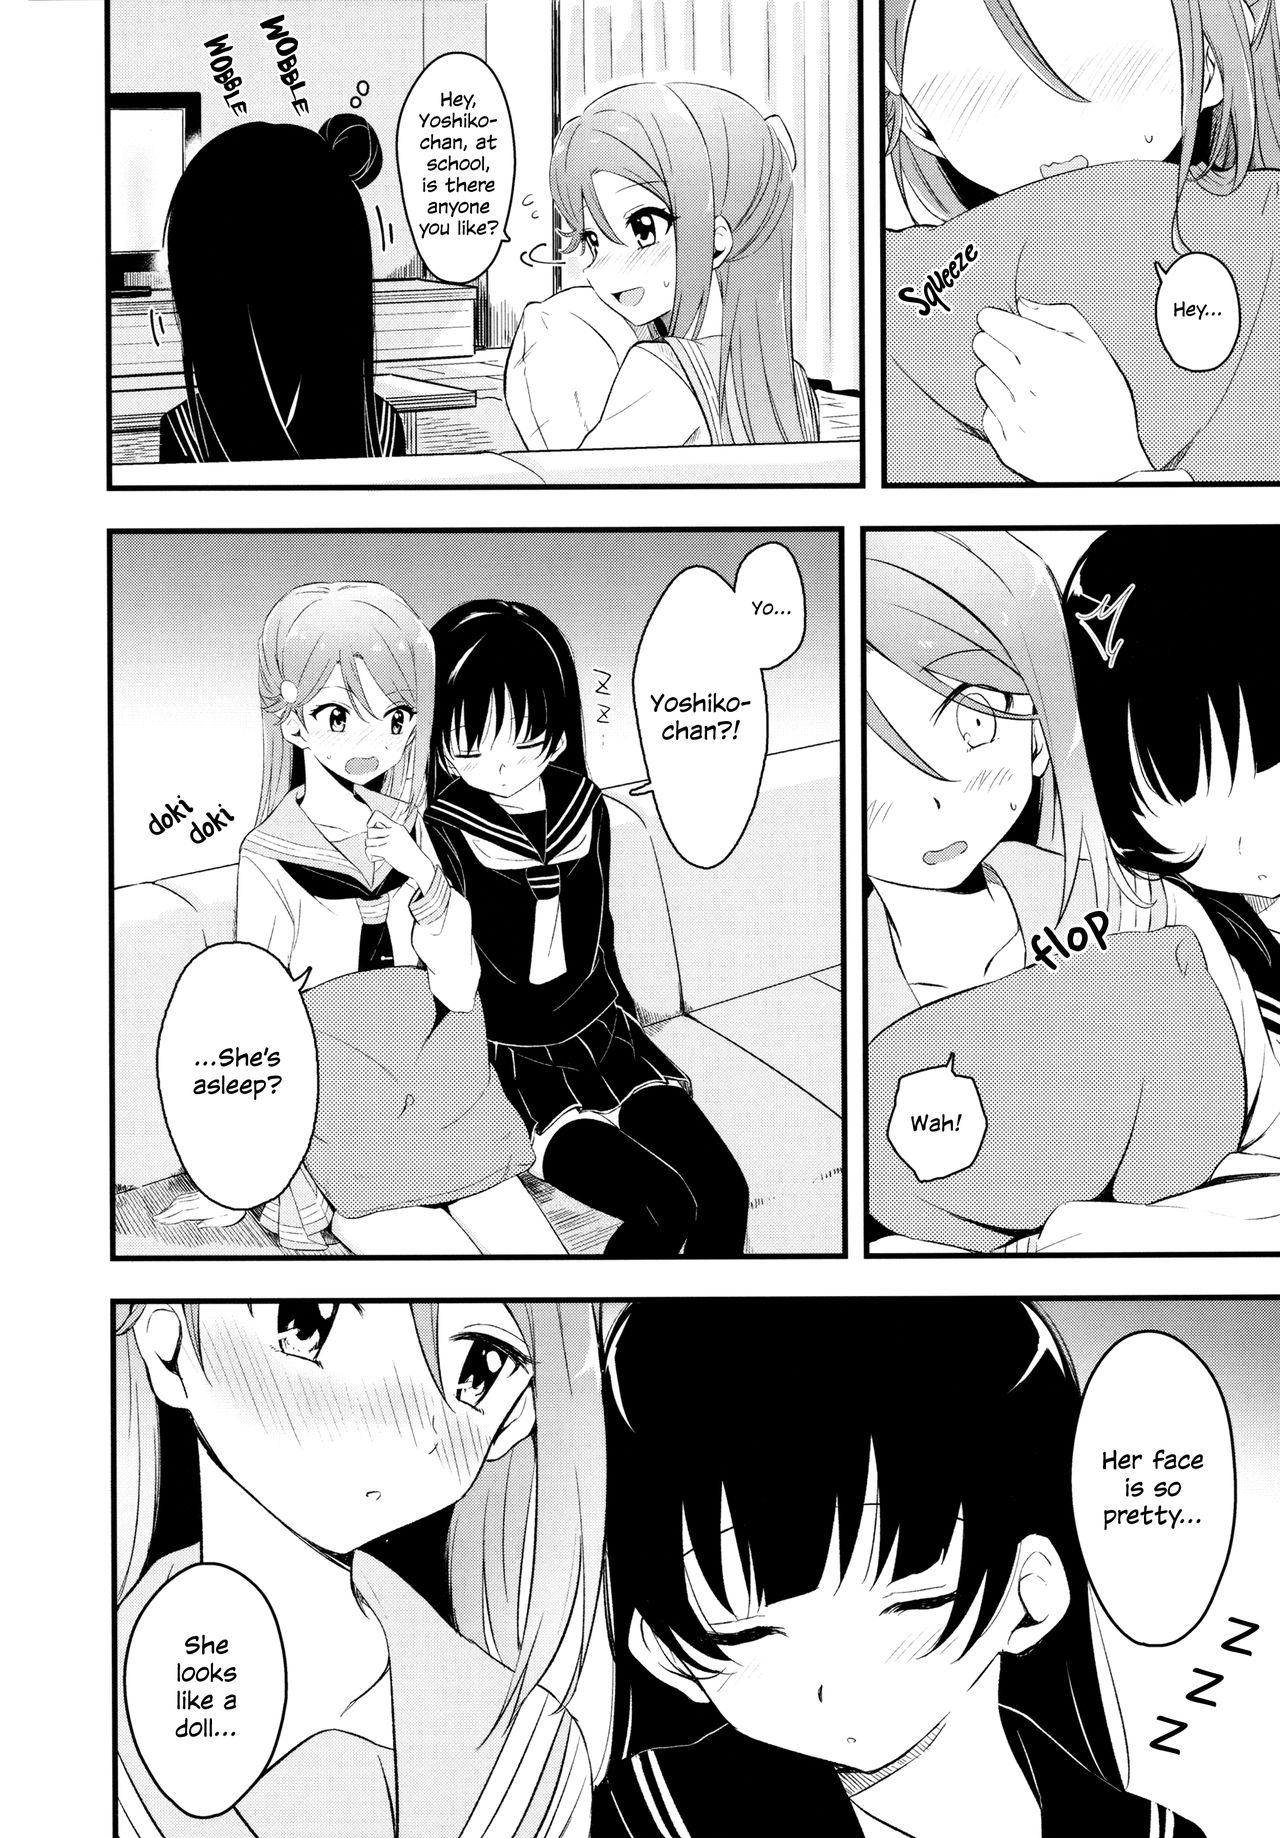 Home Bitter Sweet Syndrome - Love live sunshine Amatuer - Page 6